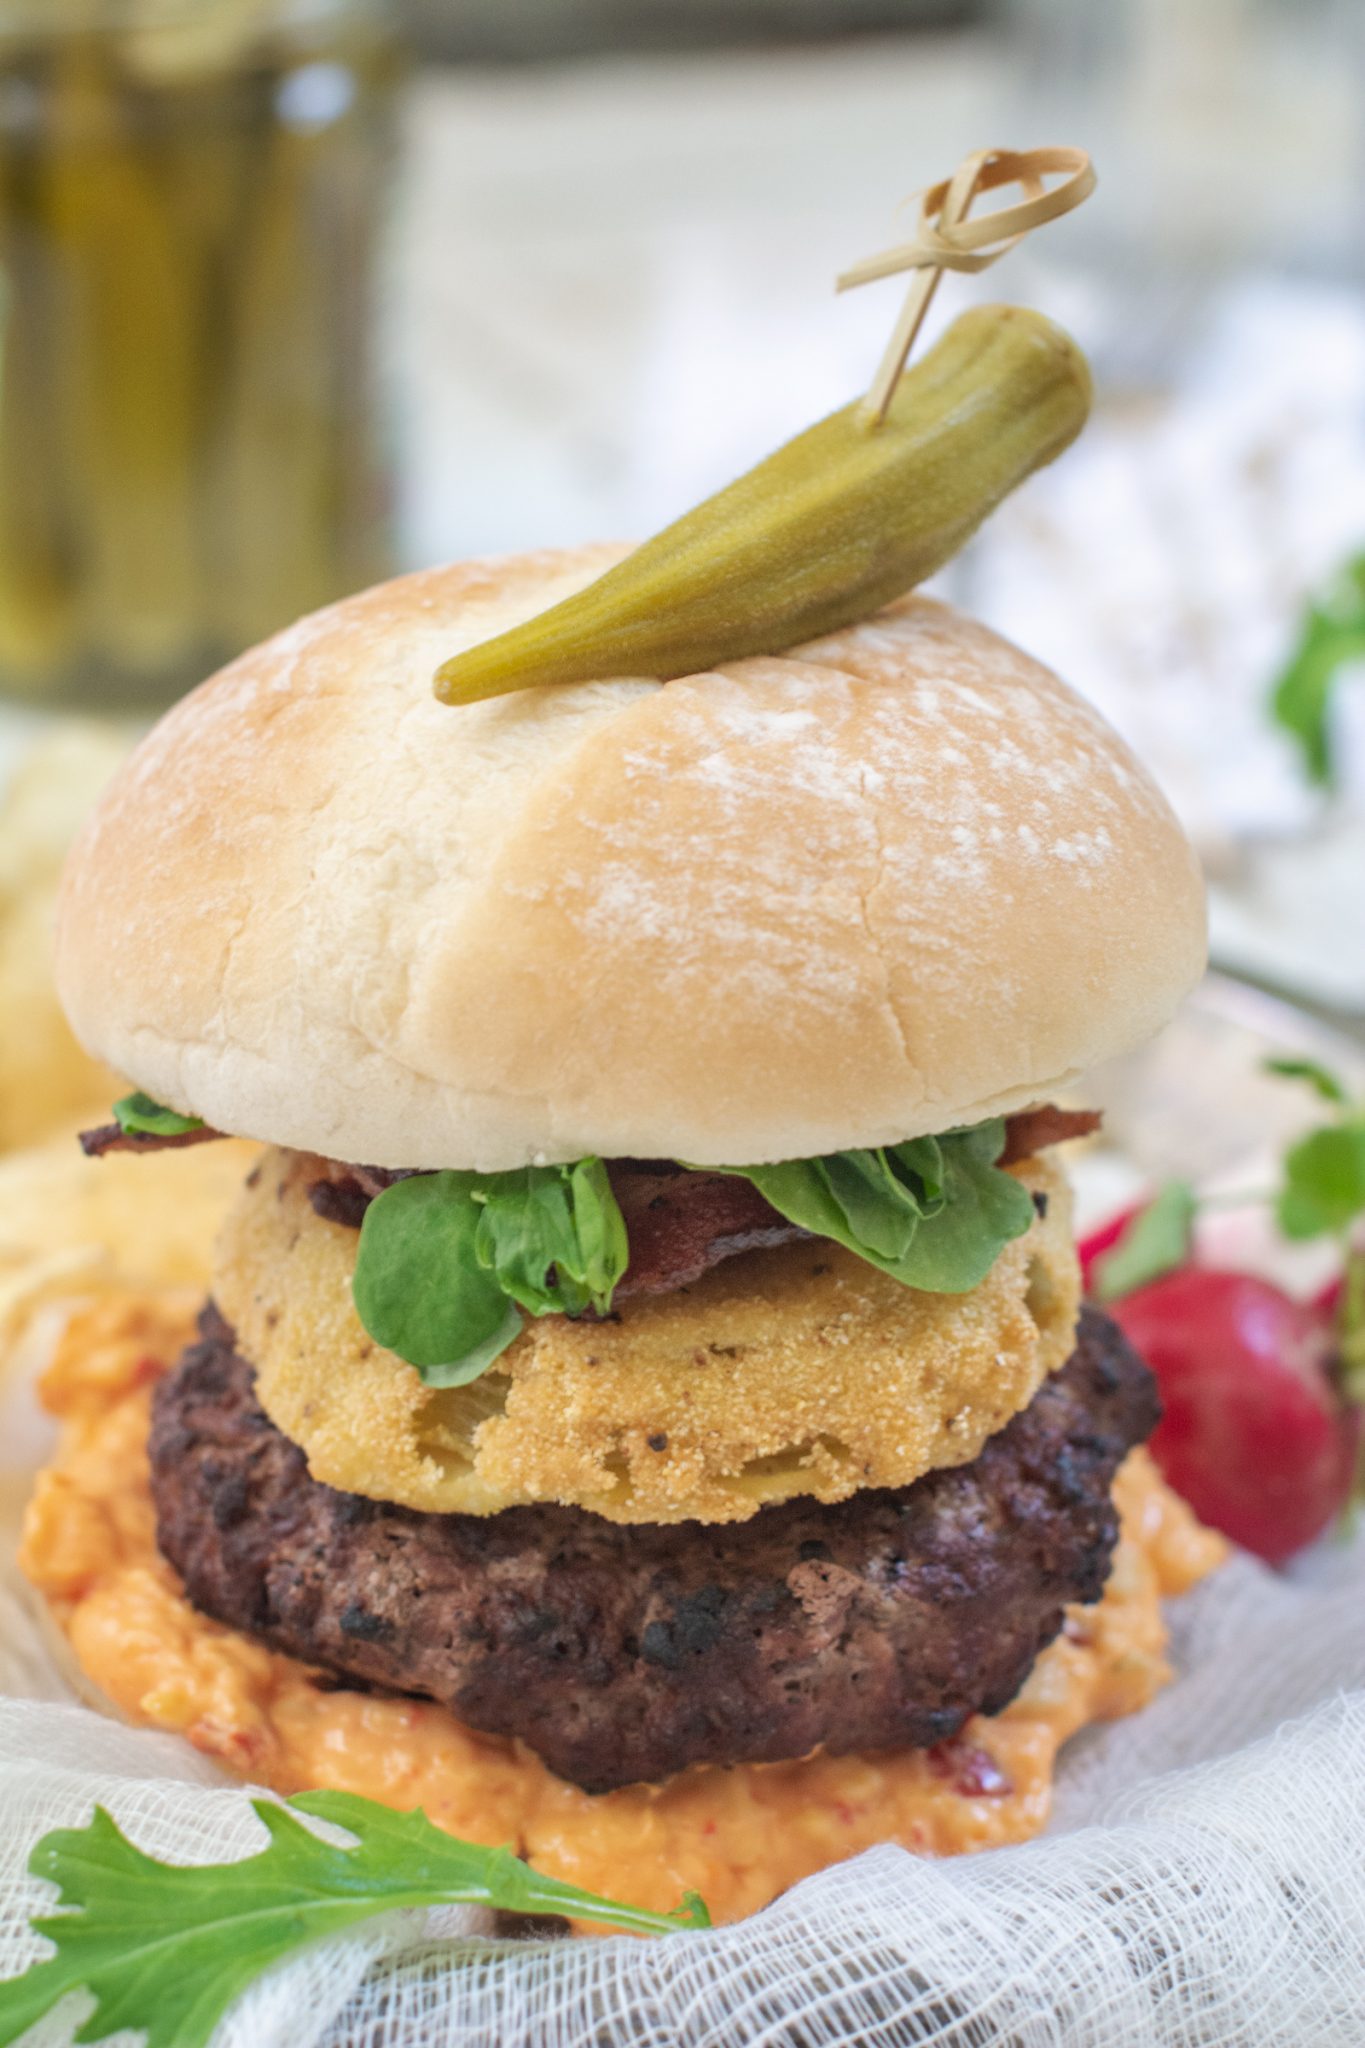 A Southern Burger topped with pimiento cheese, fried green tomatoes, lettuce and bacon.